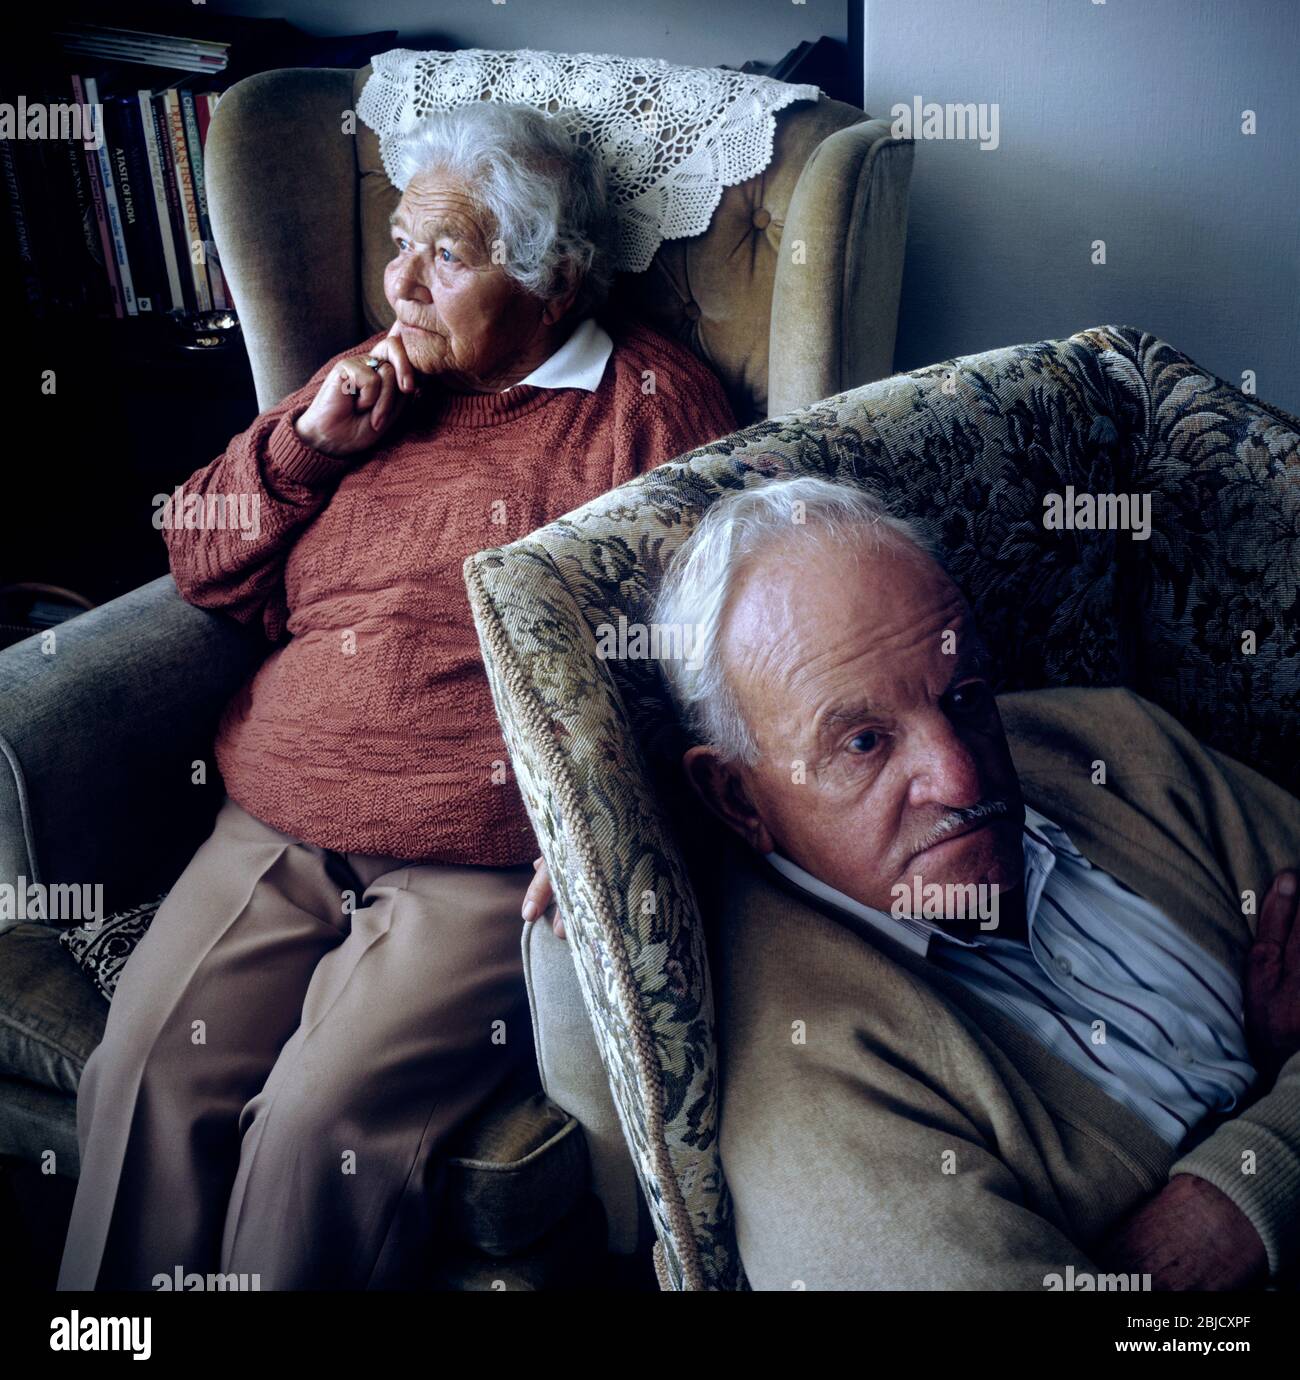 Elderly senior old age couple at home together with pensive thoughtful expressions sitting facing away from each other Stock Photo